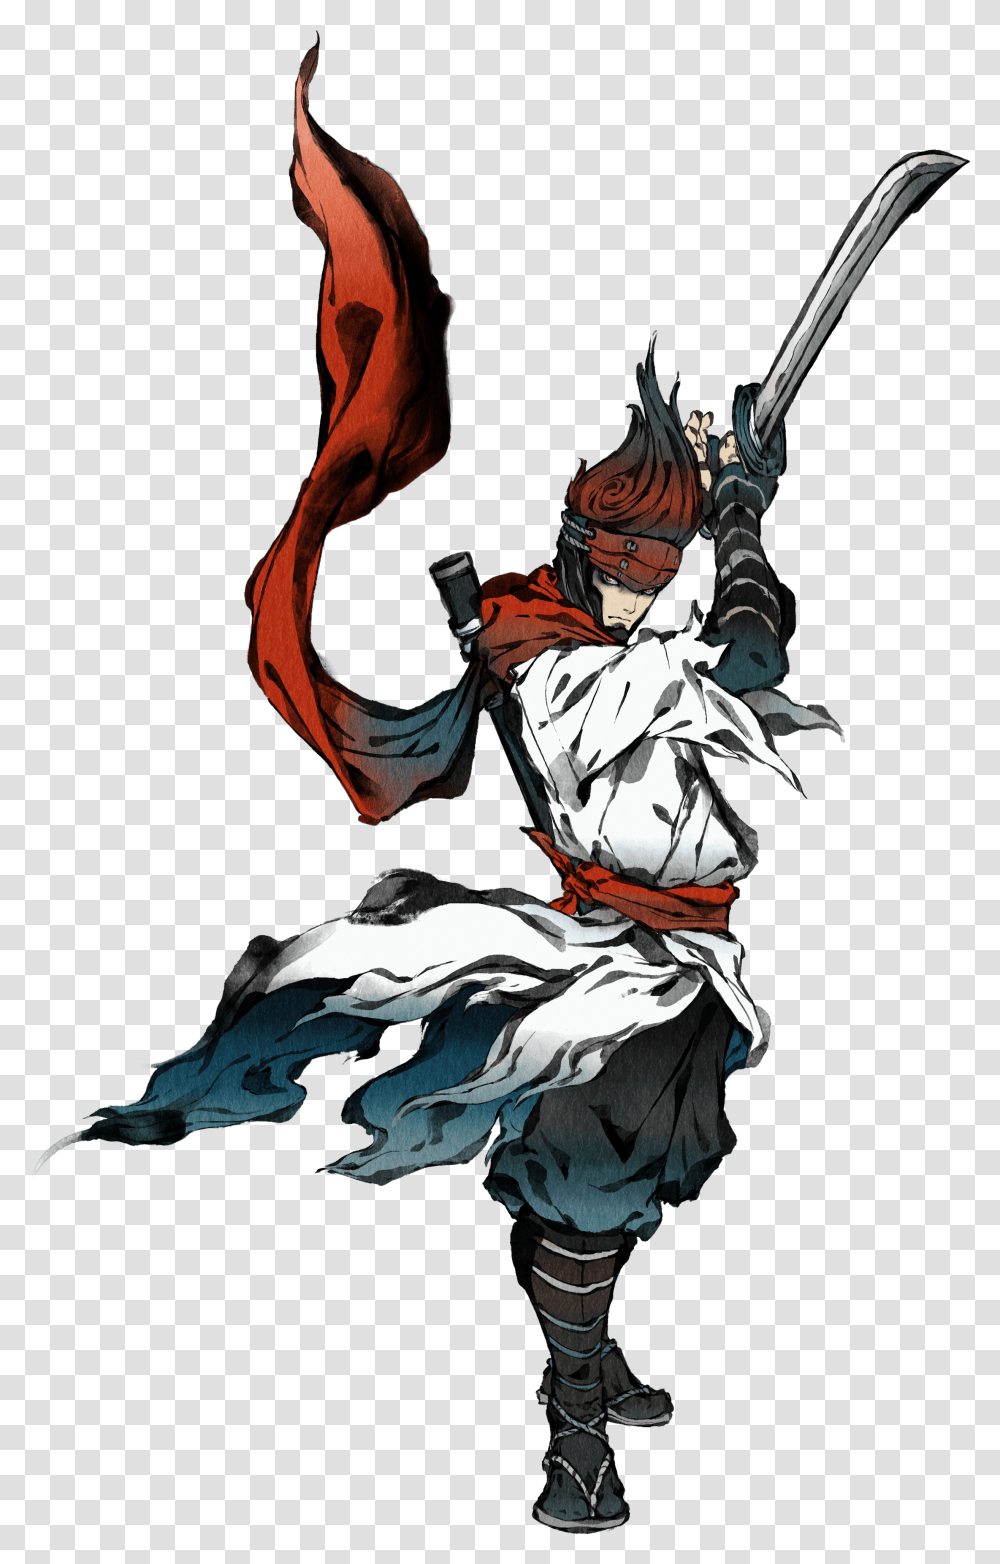 After The Oni Killed His Parents Onimaru Was Kidnapped Ykai Demons Concept Art Transparent Png